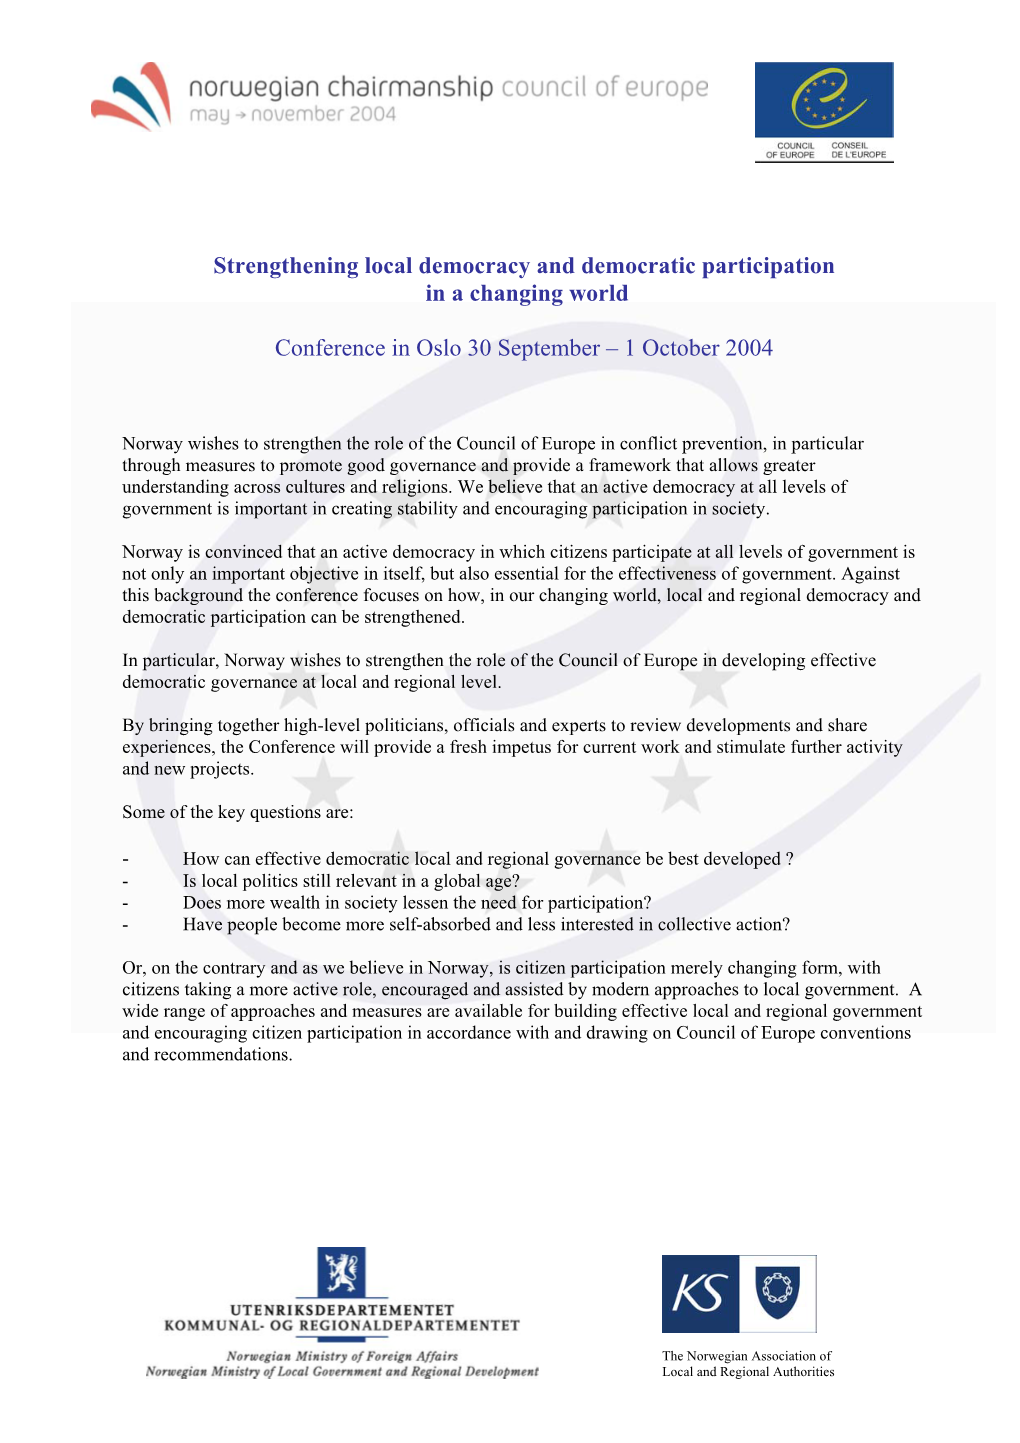 Strengthening Local Democracy and Democratic Participation in a Changing World